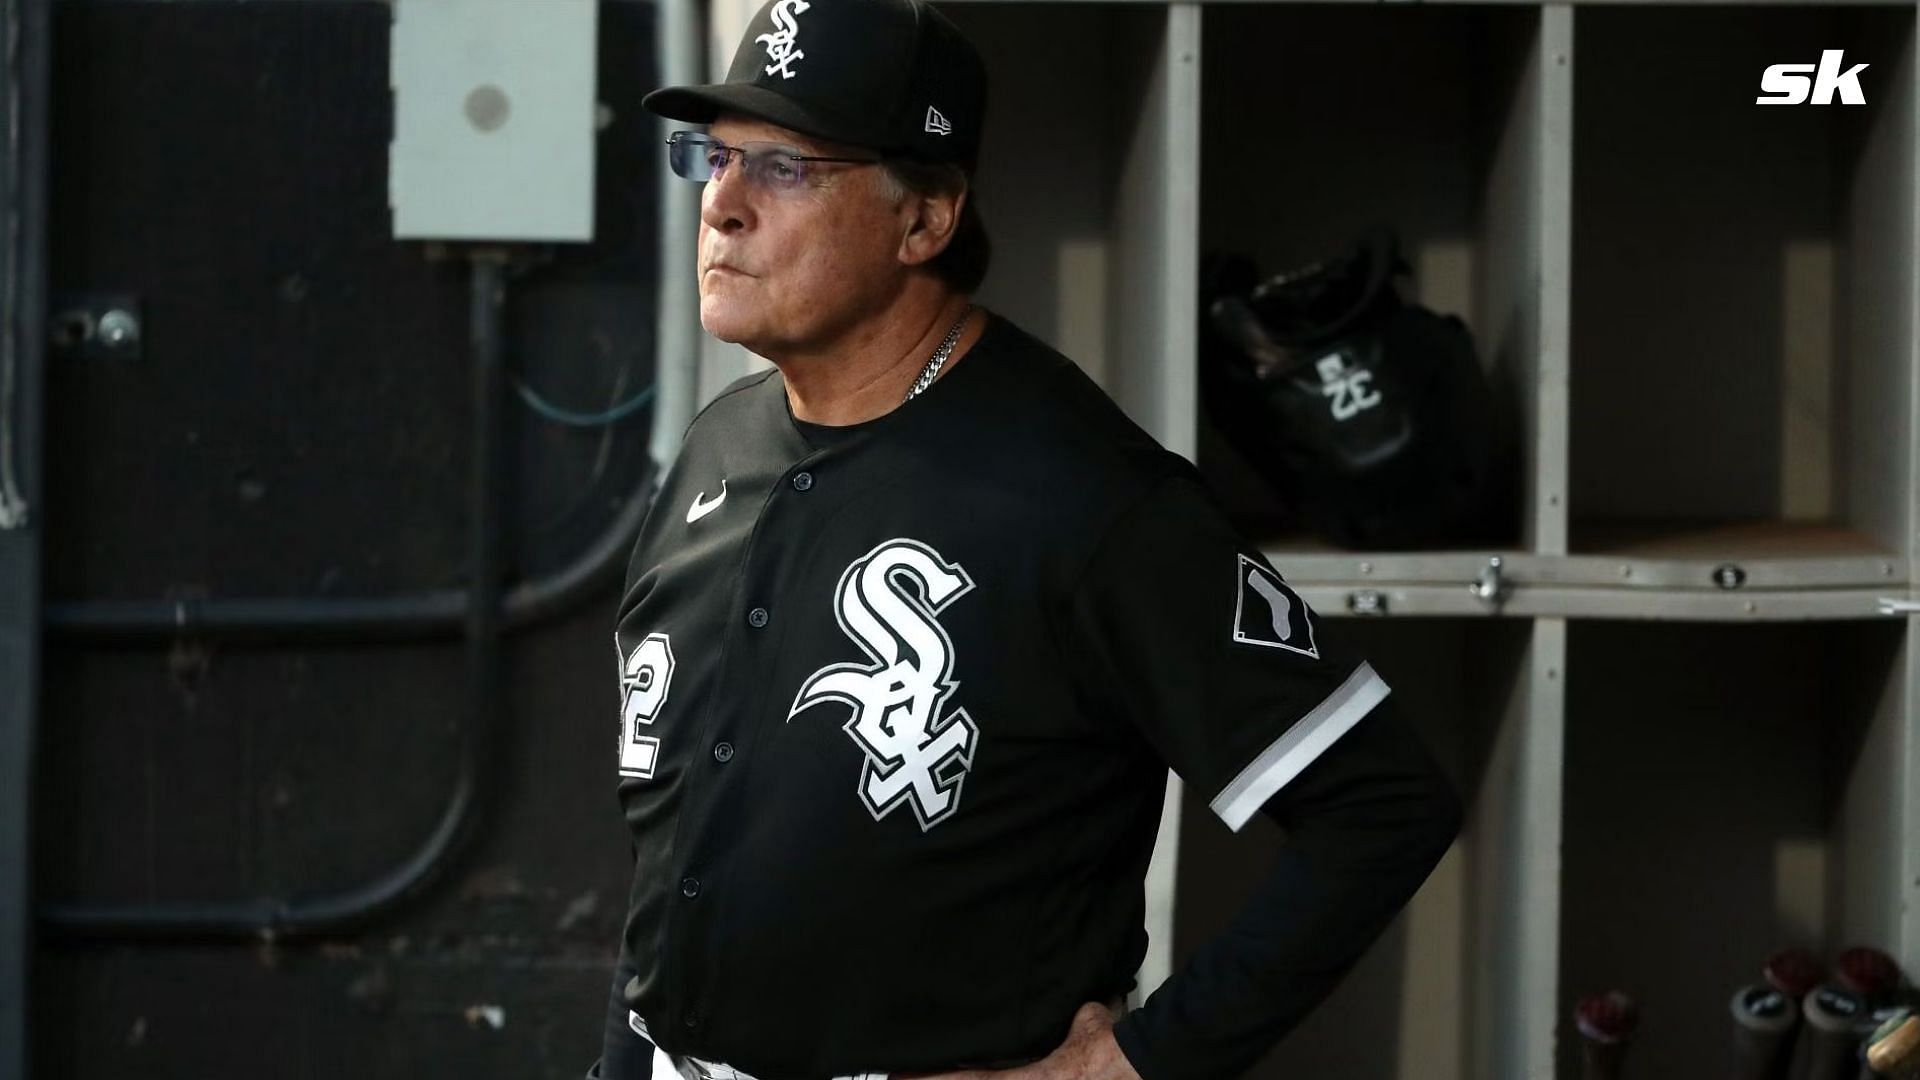 Former MLB manager Tony La Russa called out White Sox player